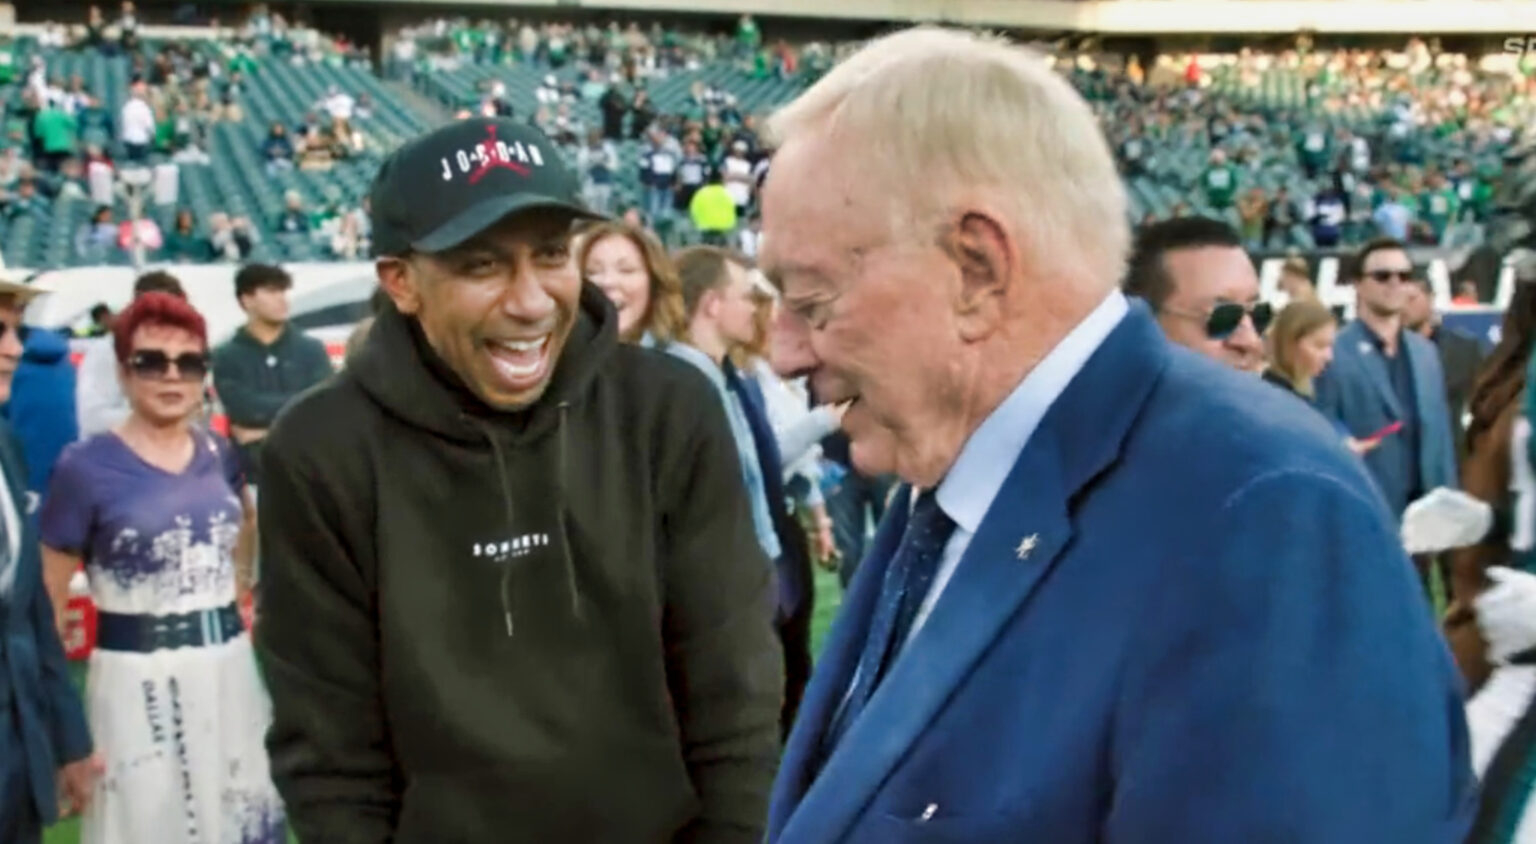 Cowboys Owner Jerry Jones and Stephen A. Smith Bonded During an Awkward Exchange That Was Caught on Camera (VIDEO)